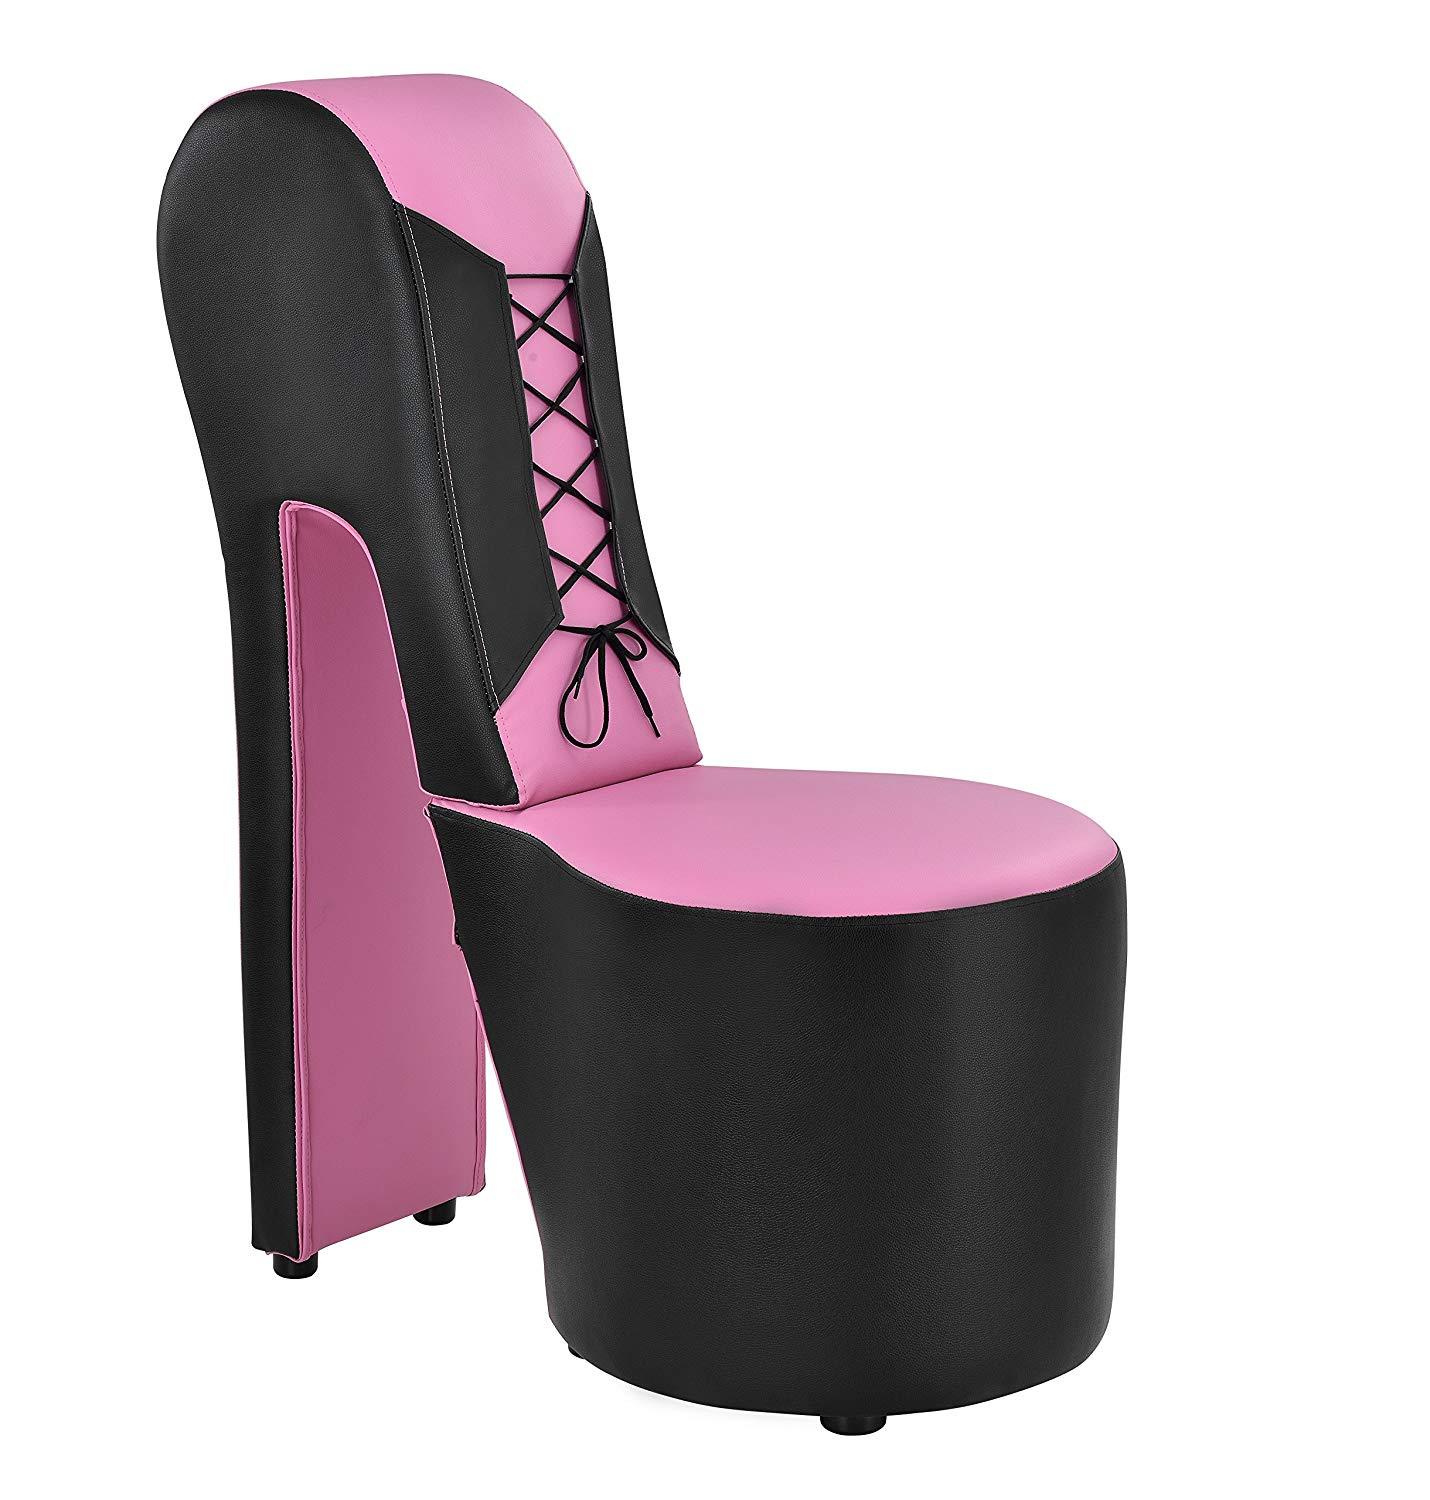 STILETTO PU Leather Armchair Cocktail Accent Chair with Lace Details, Pink & Black